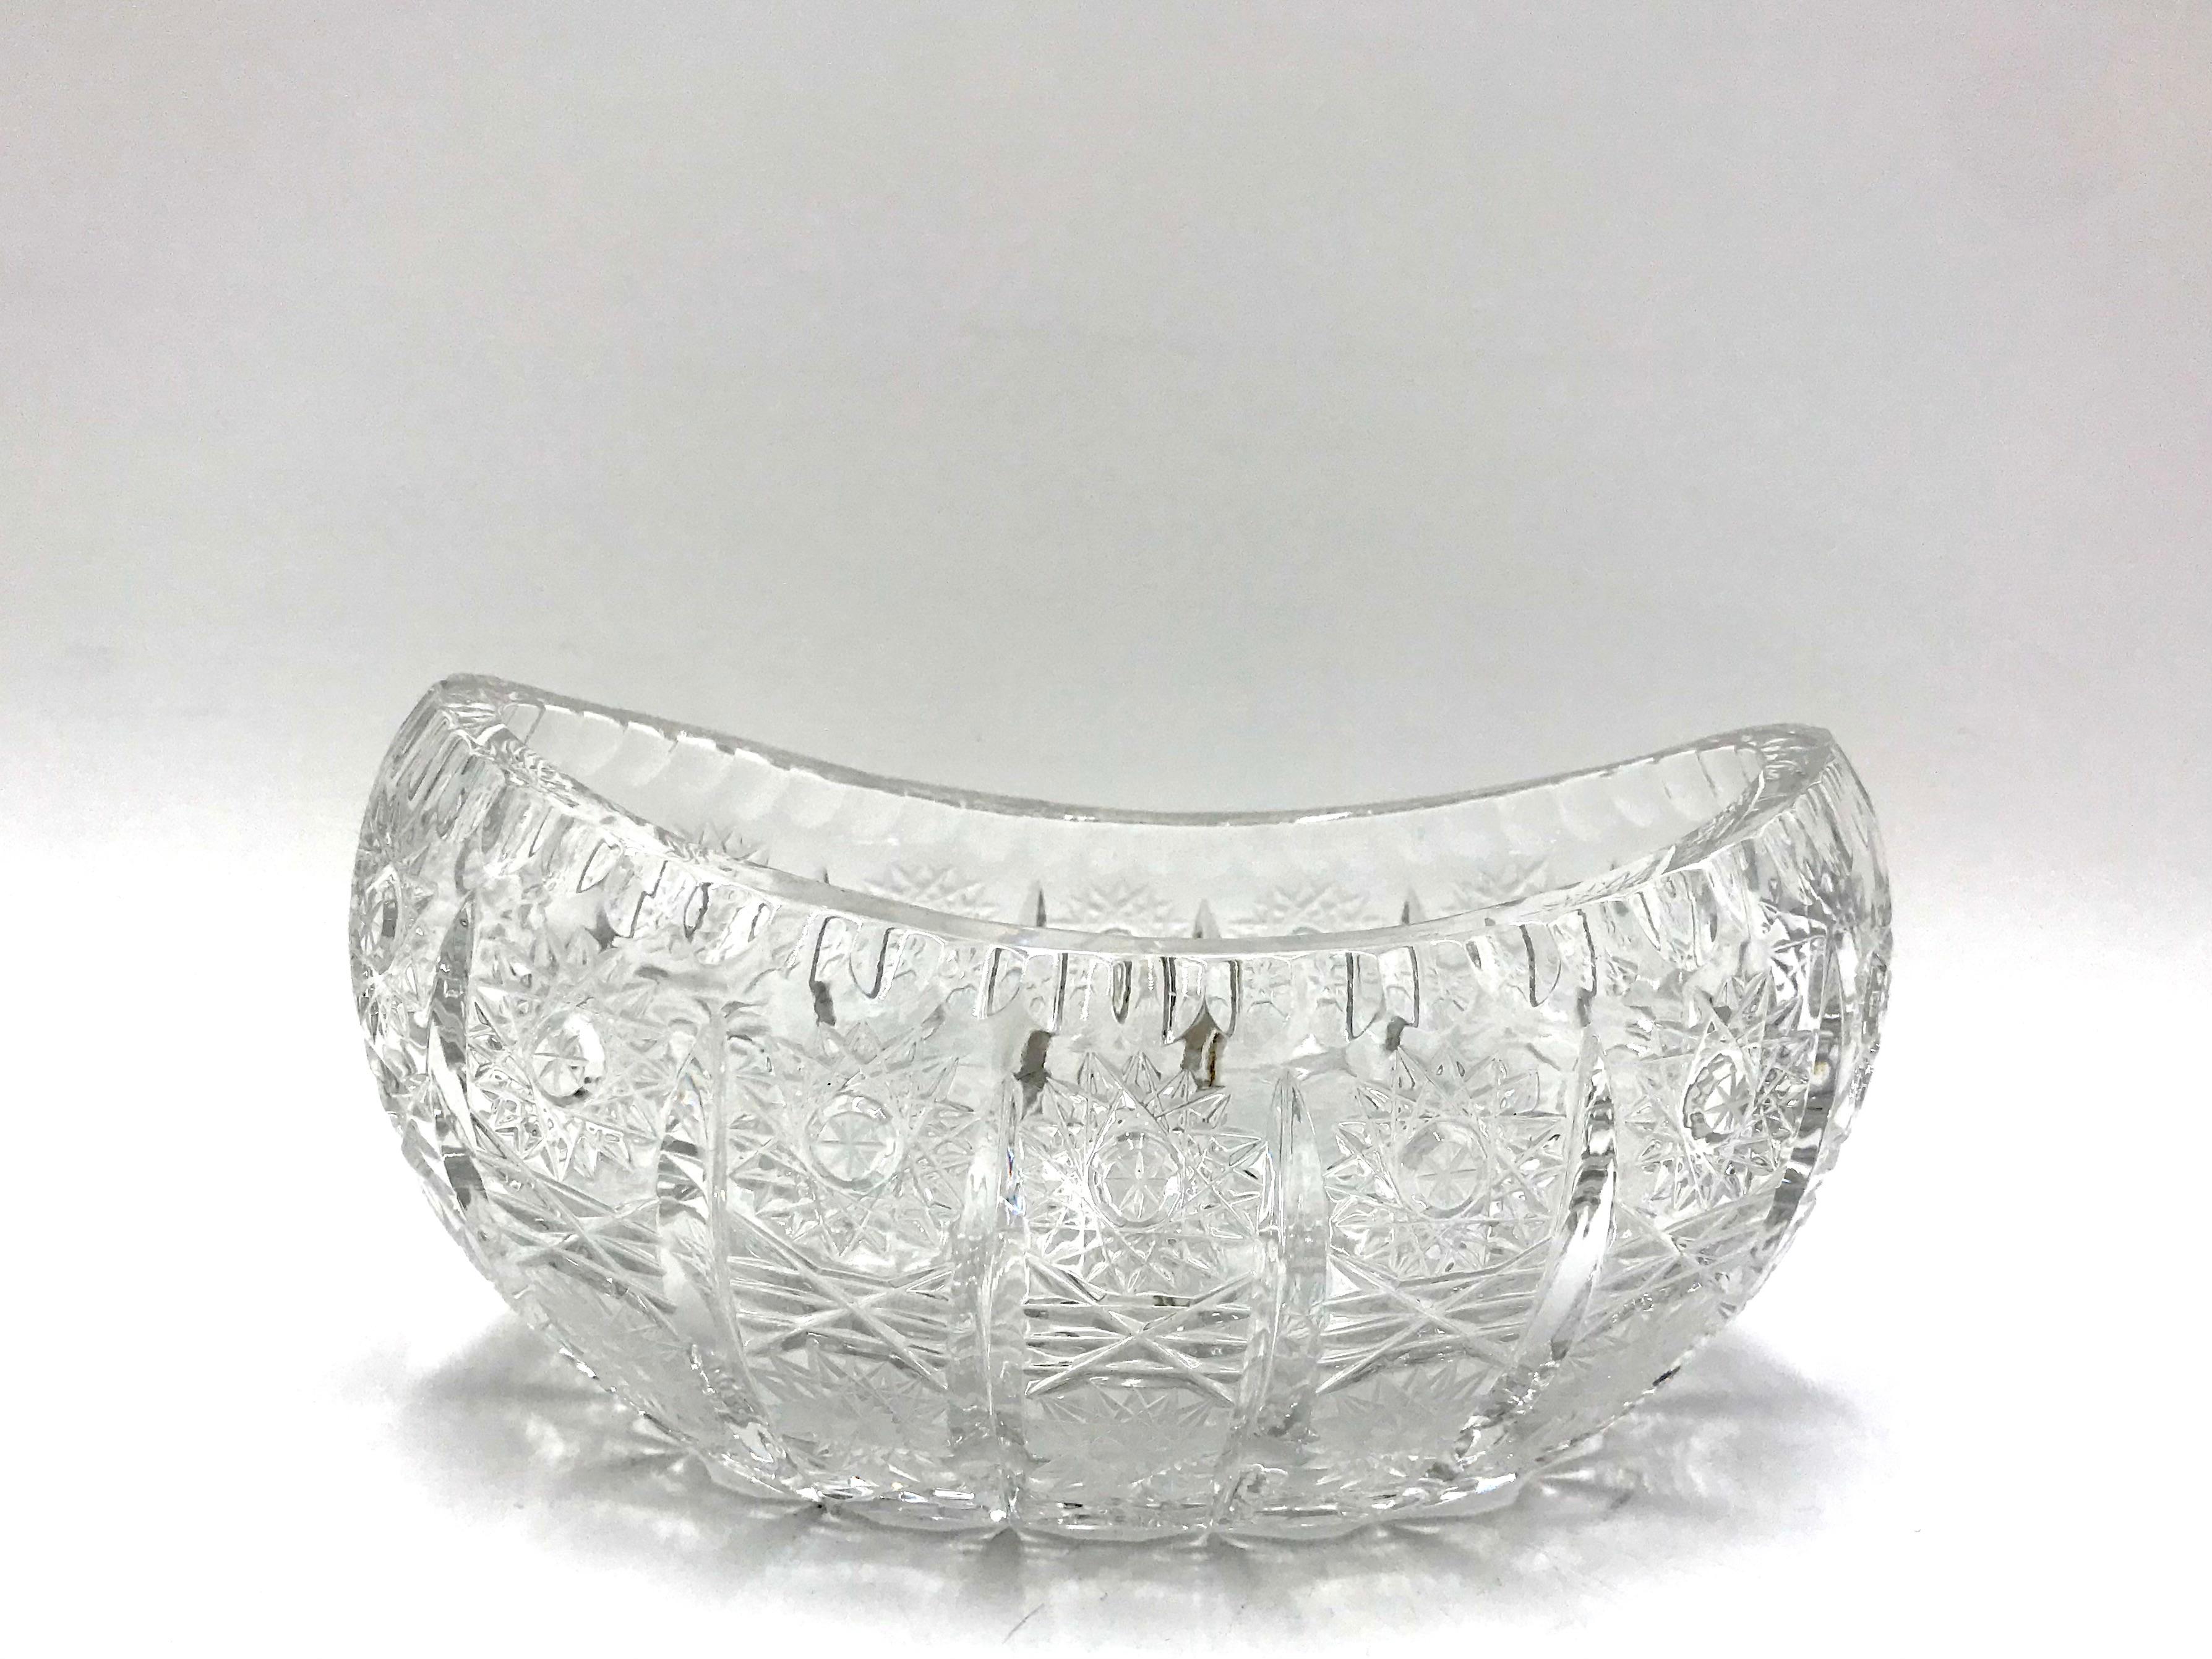 Crystal bowl 
Made in Poland in the 1950s / 1960s.
Very good condition.
Dimensions: height 9cm, width 18cm, depth 11cm.